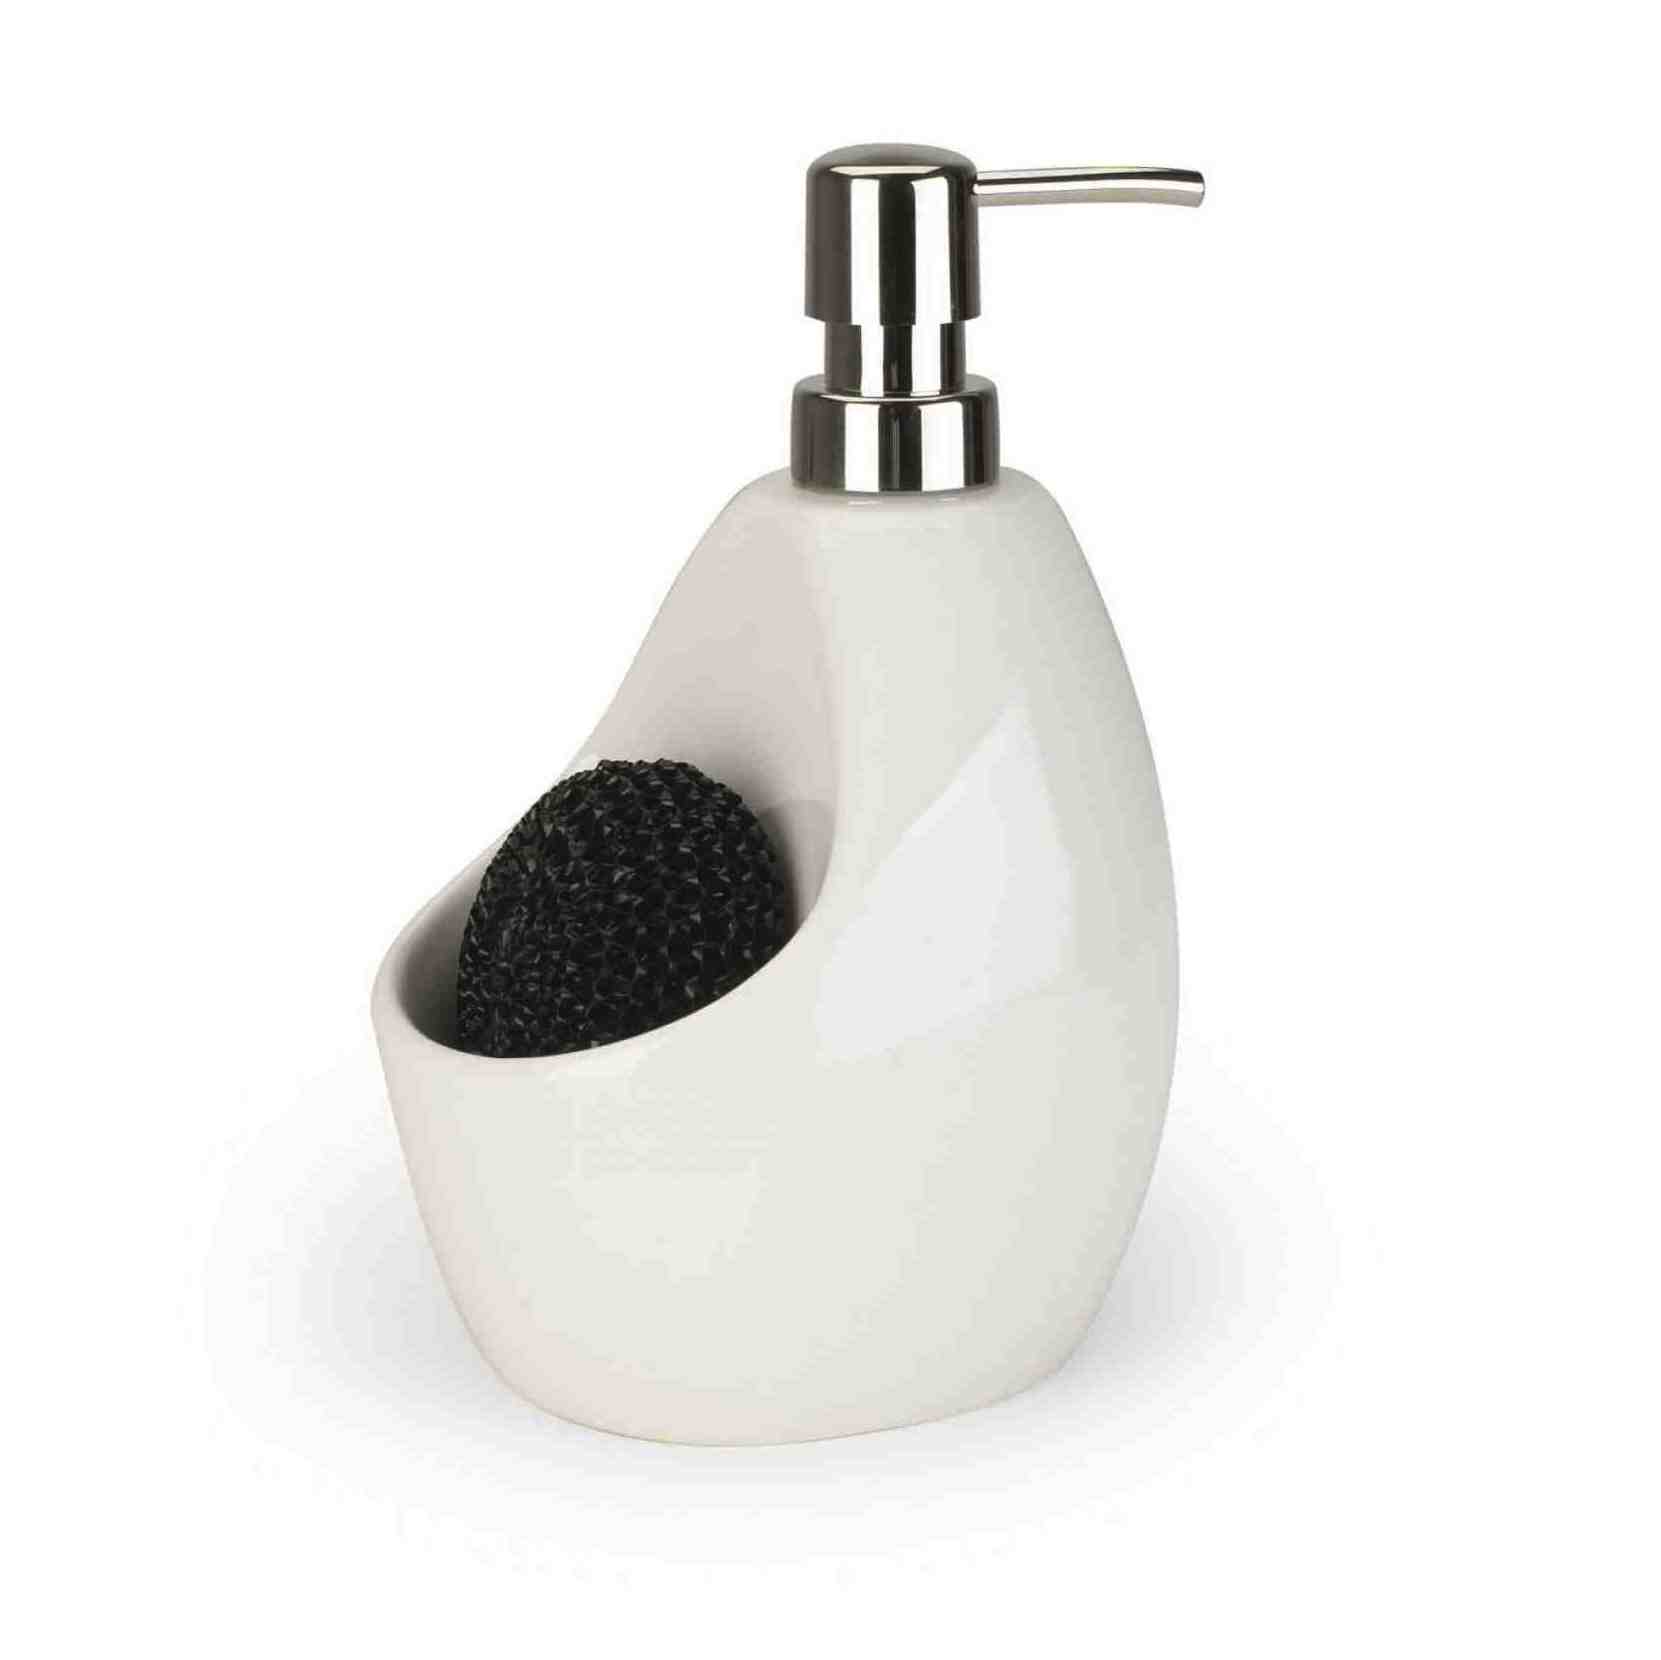 Umbra Joey Soap Pump and Scrubby Holder